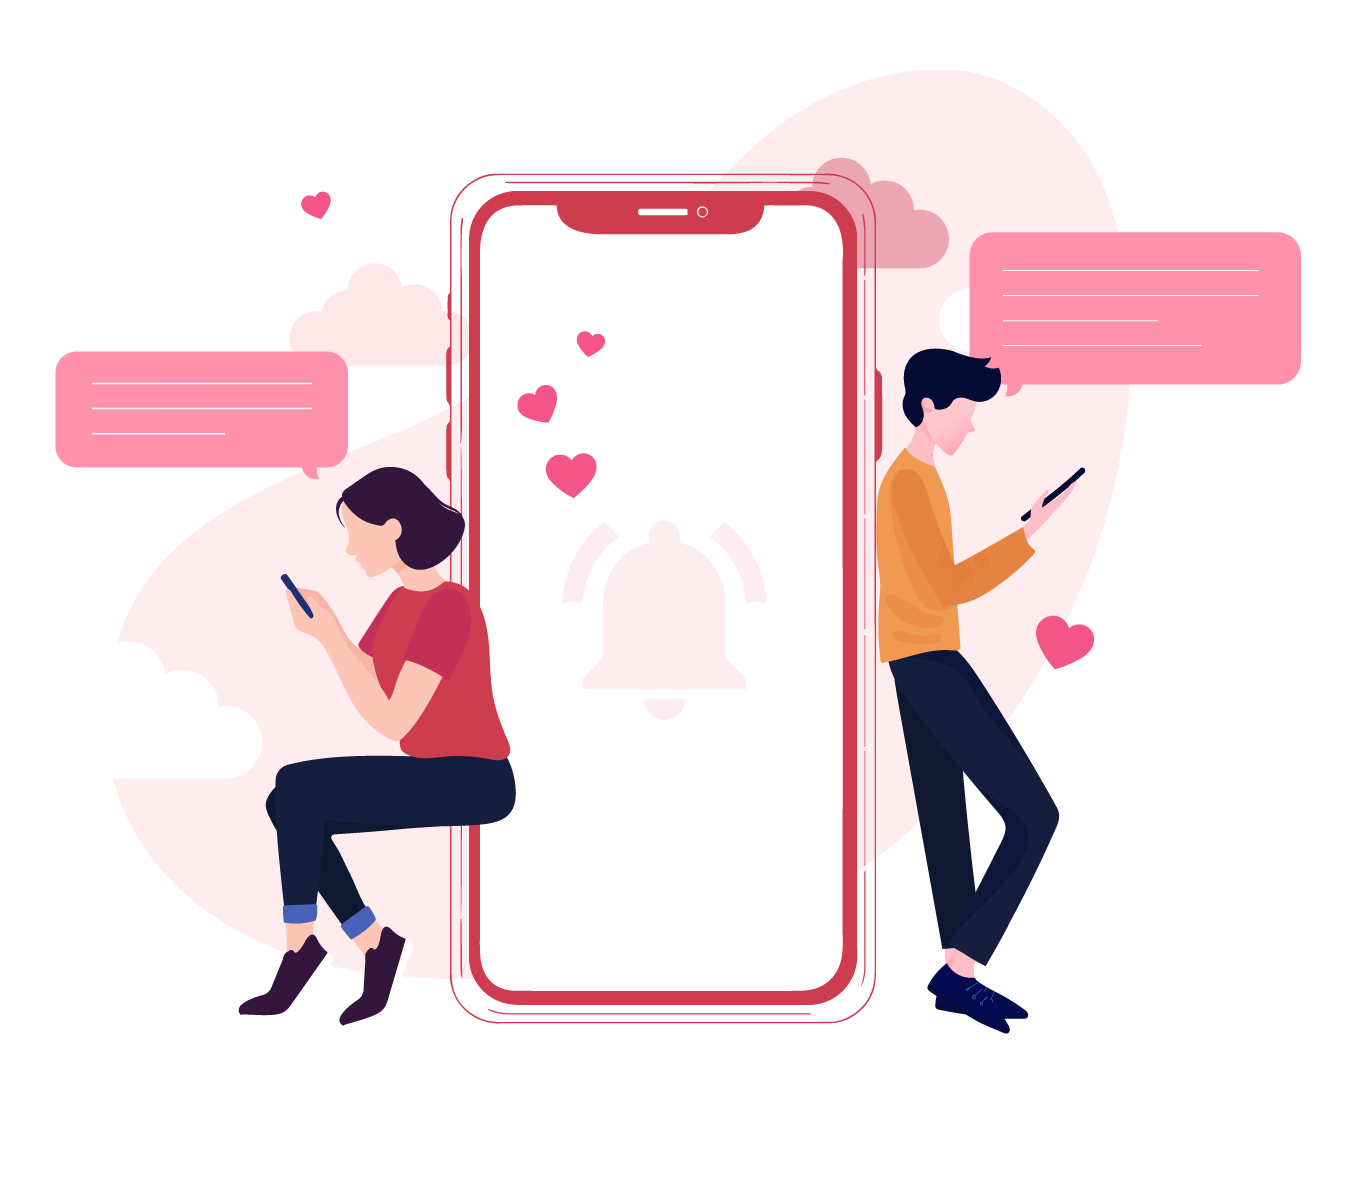 Illustration of a man and a women getting notified by the app that they are making contact with one another